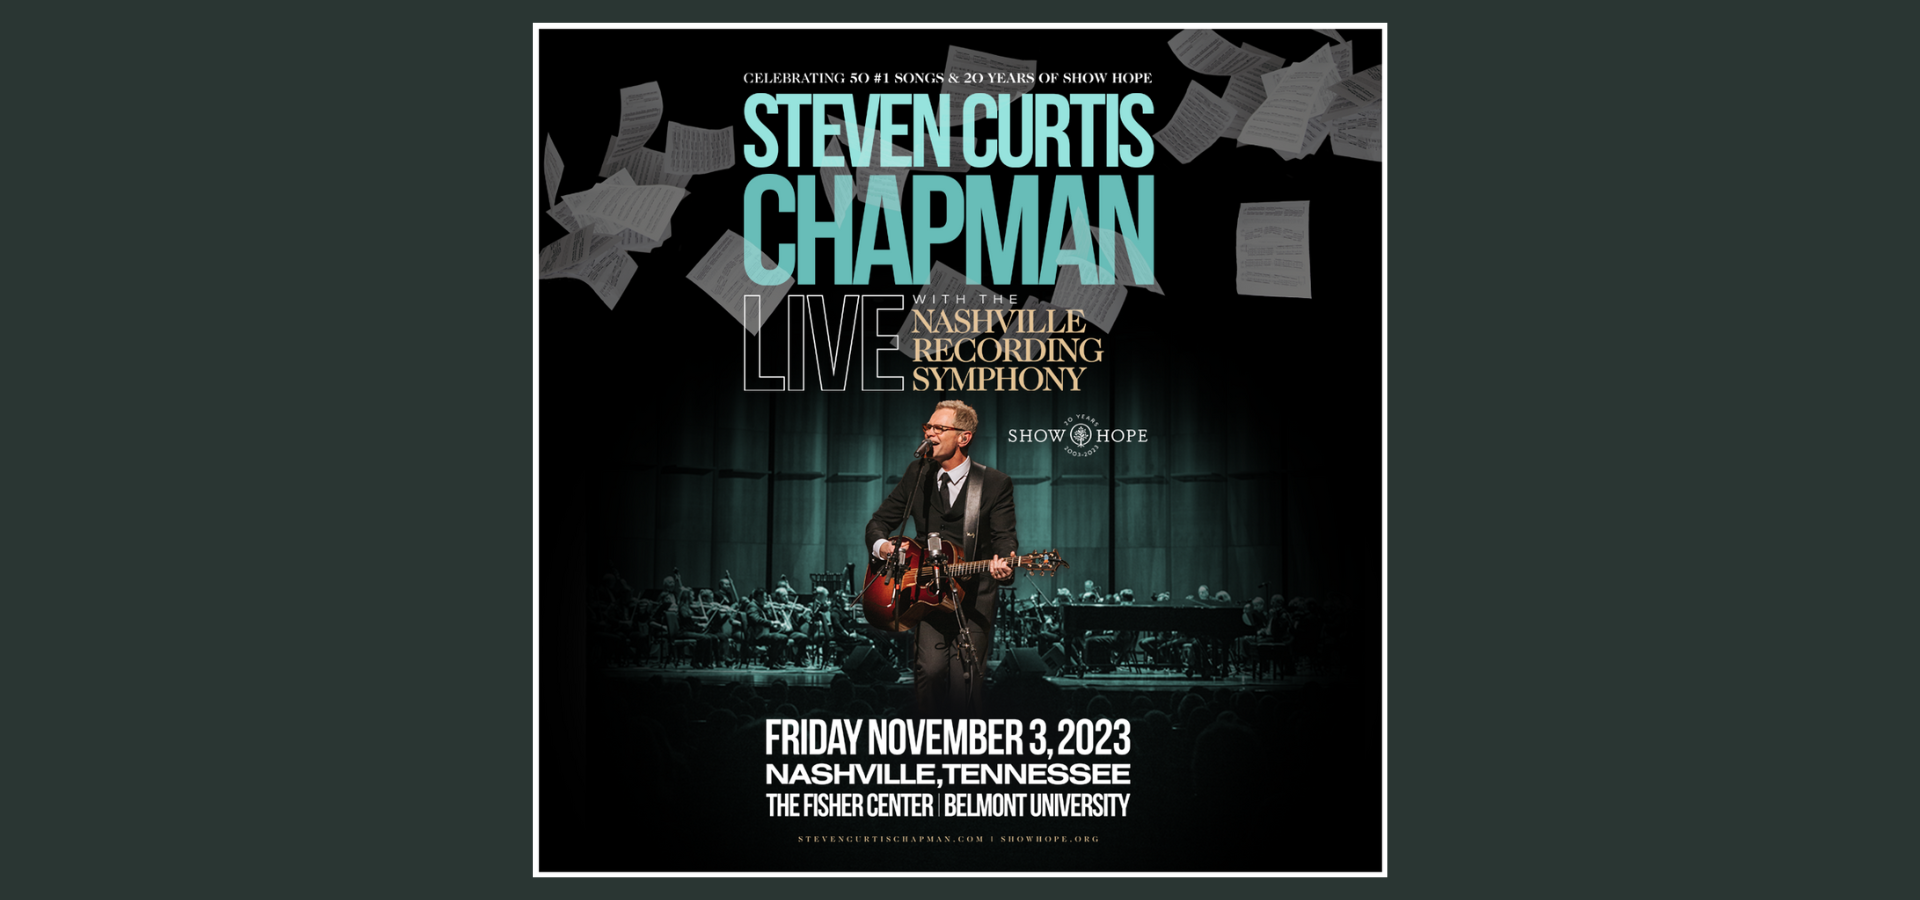 Steven Curtis Chapman Performing At The Fisher Center